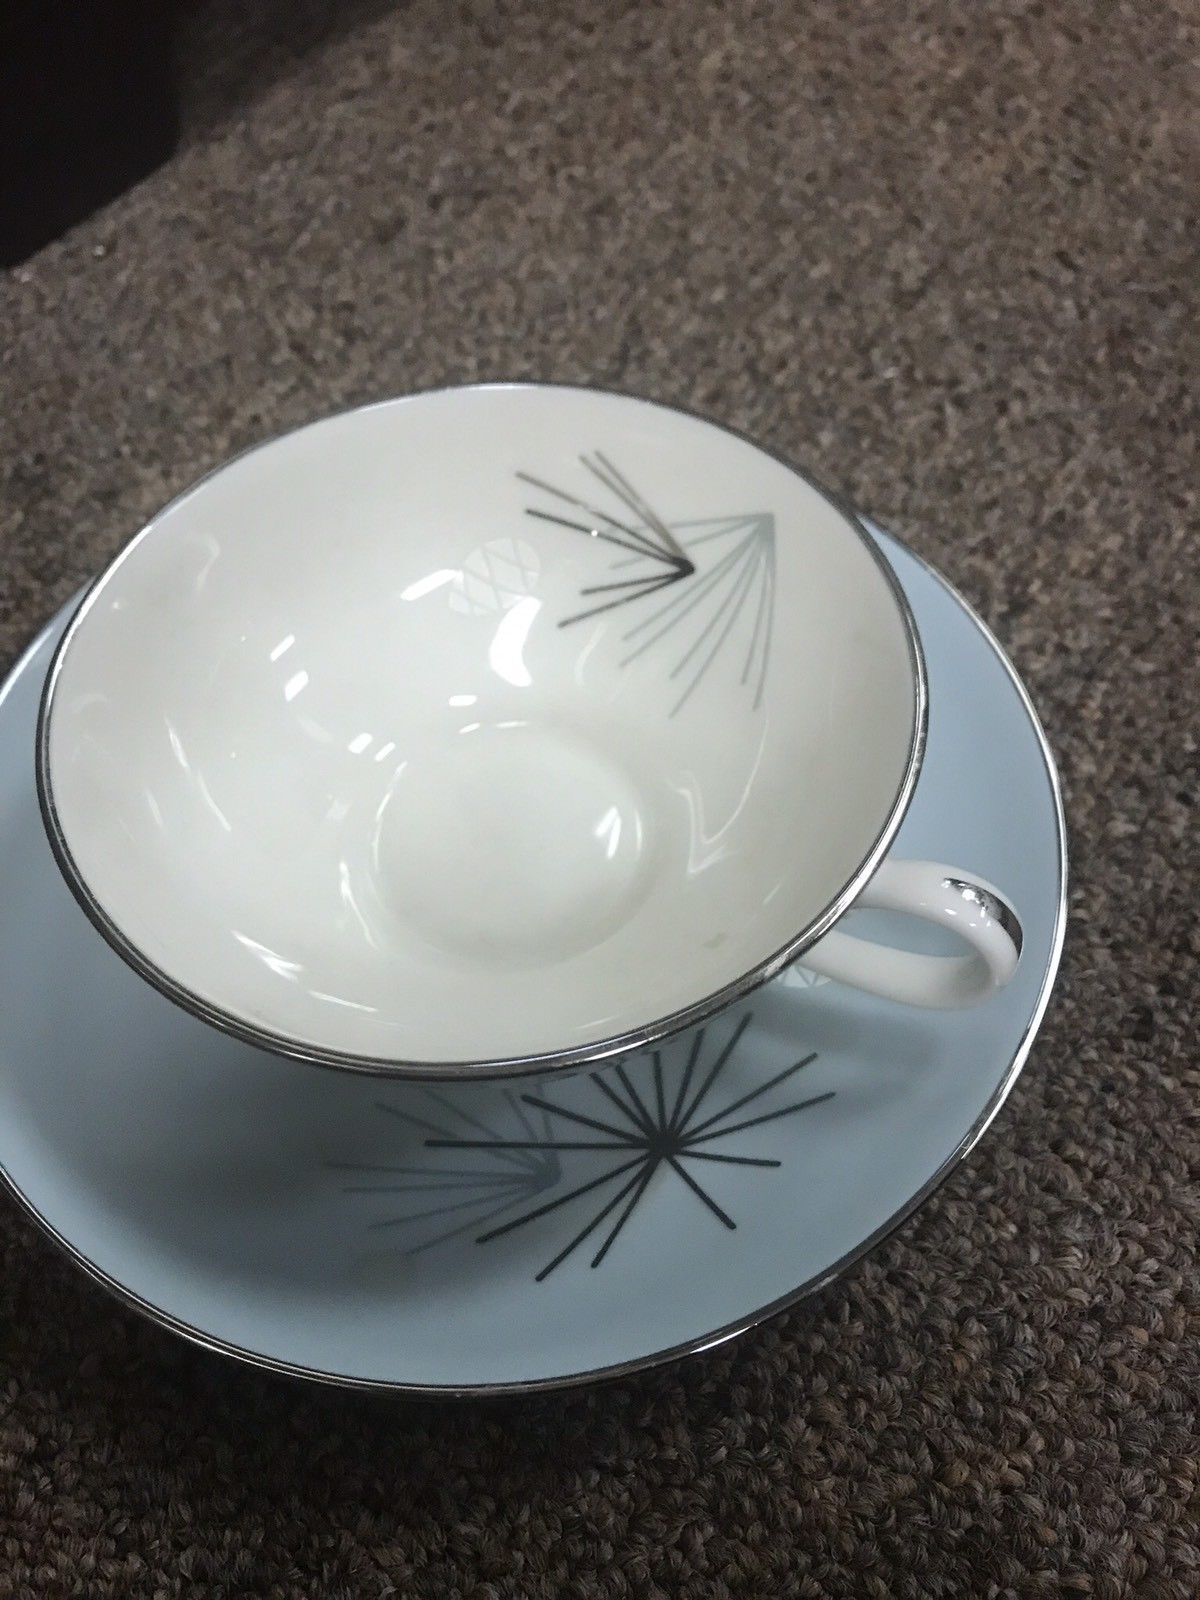 franciscan Silver Pine Comet Design Cup And Saucer Retro - $28.06